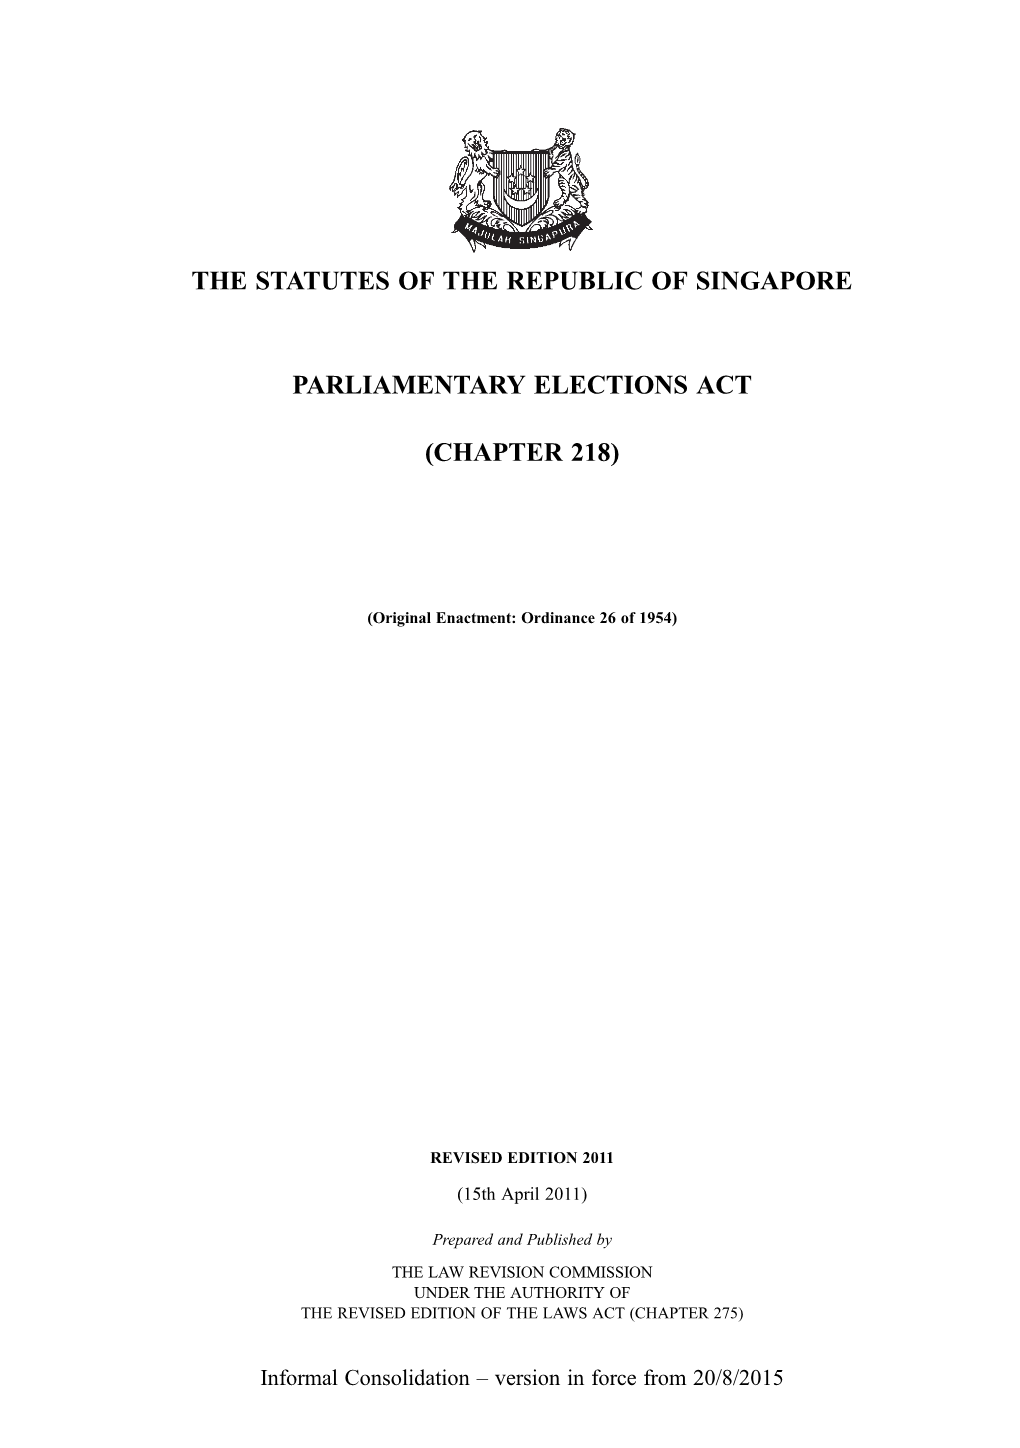 Parliamentary Elections Act